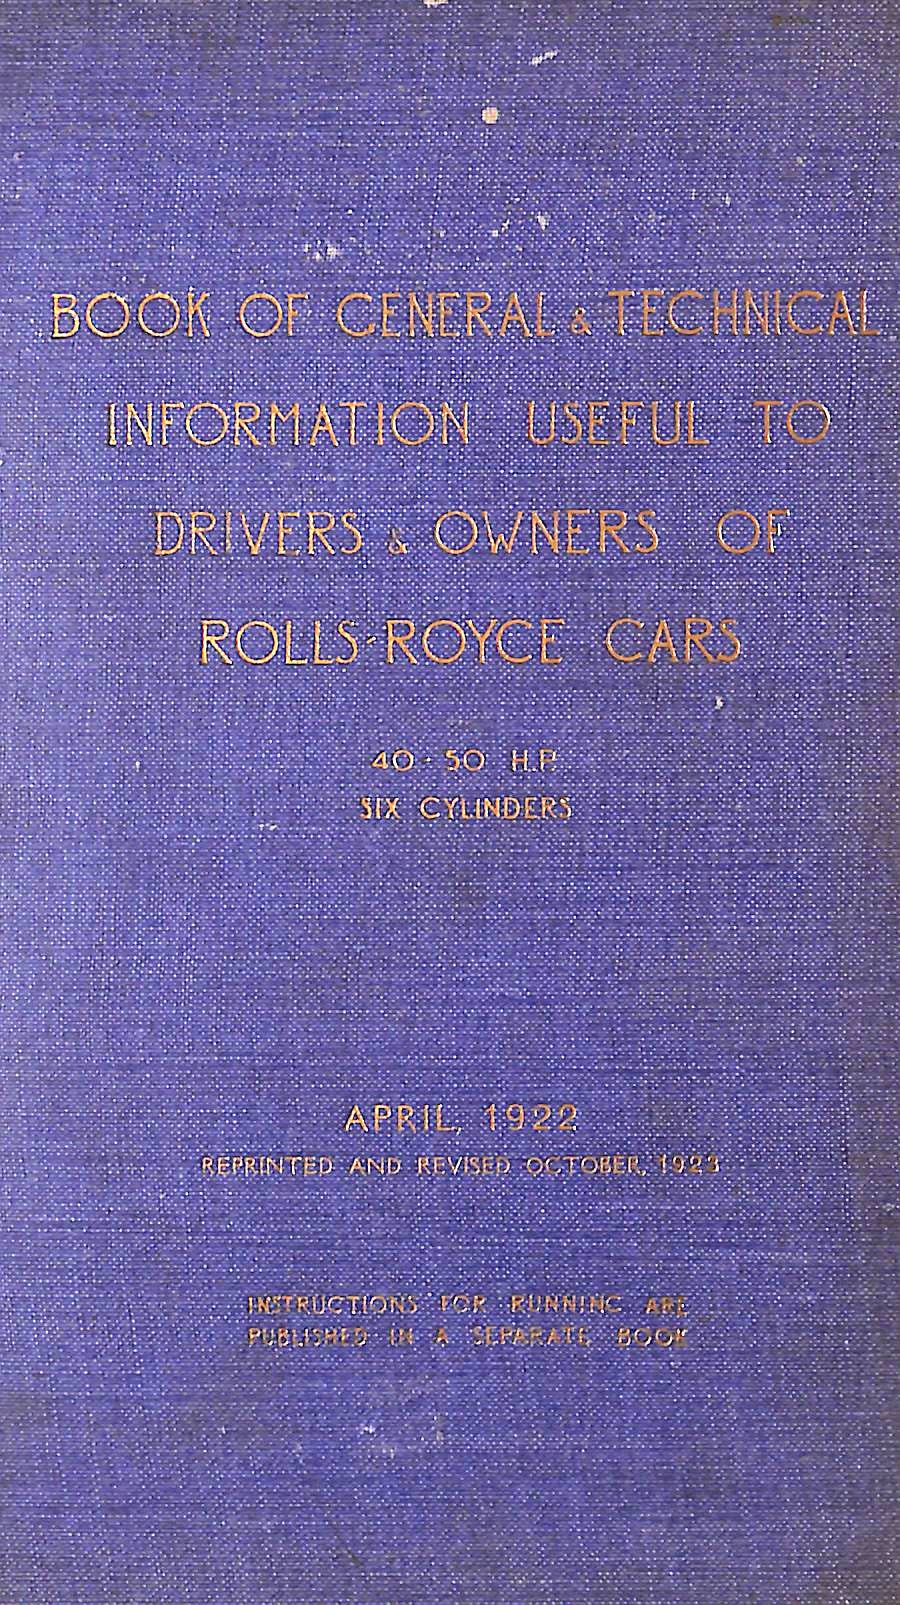 "Book Of General & Technical Information Useful To Drivers & Owners Of Rolls-Royce Cars" 1922